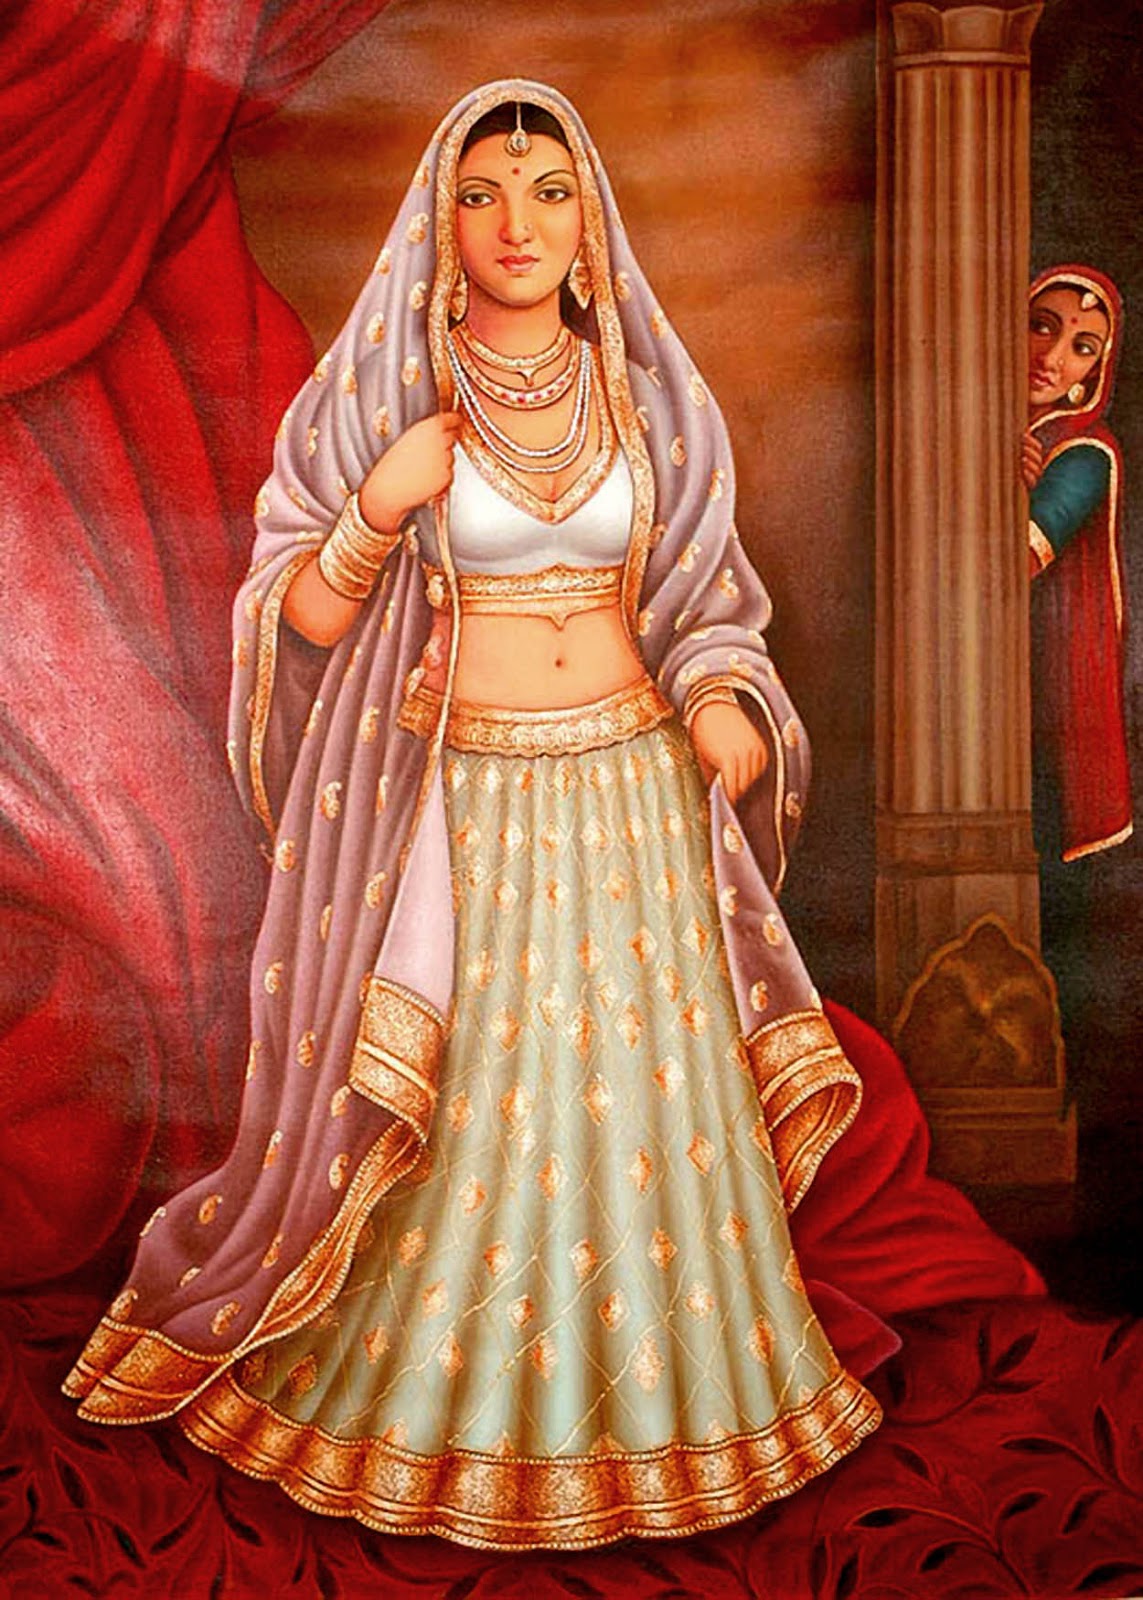 RAJASTHANI WOMAN'S PAINTING FROM INDIA